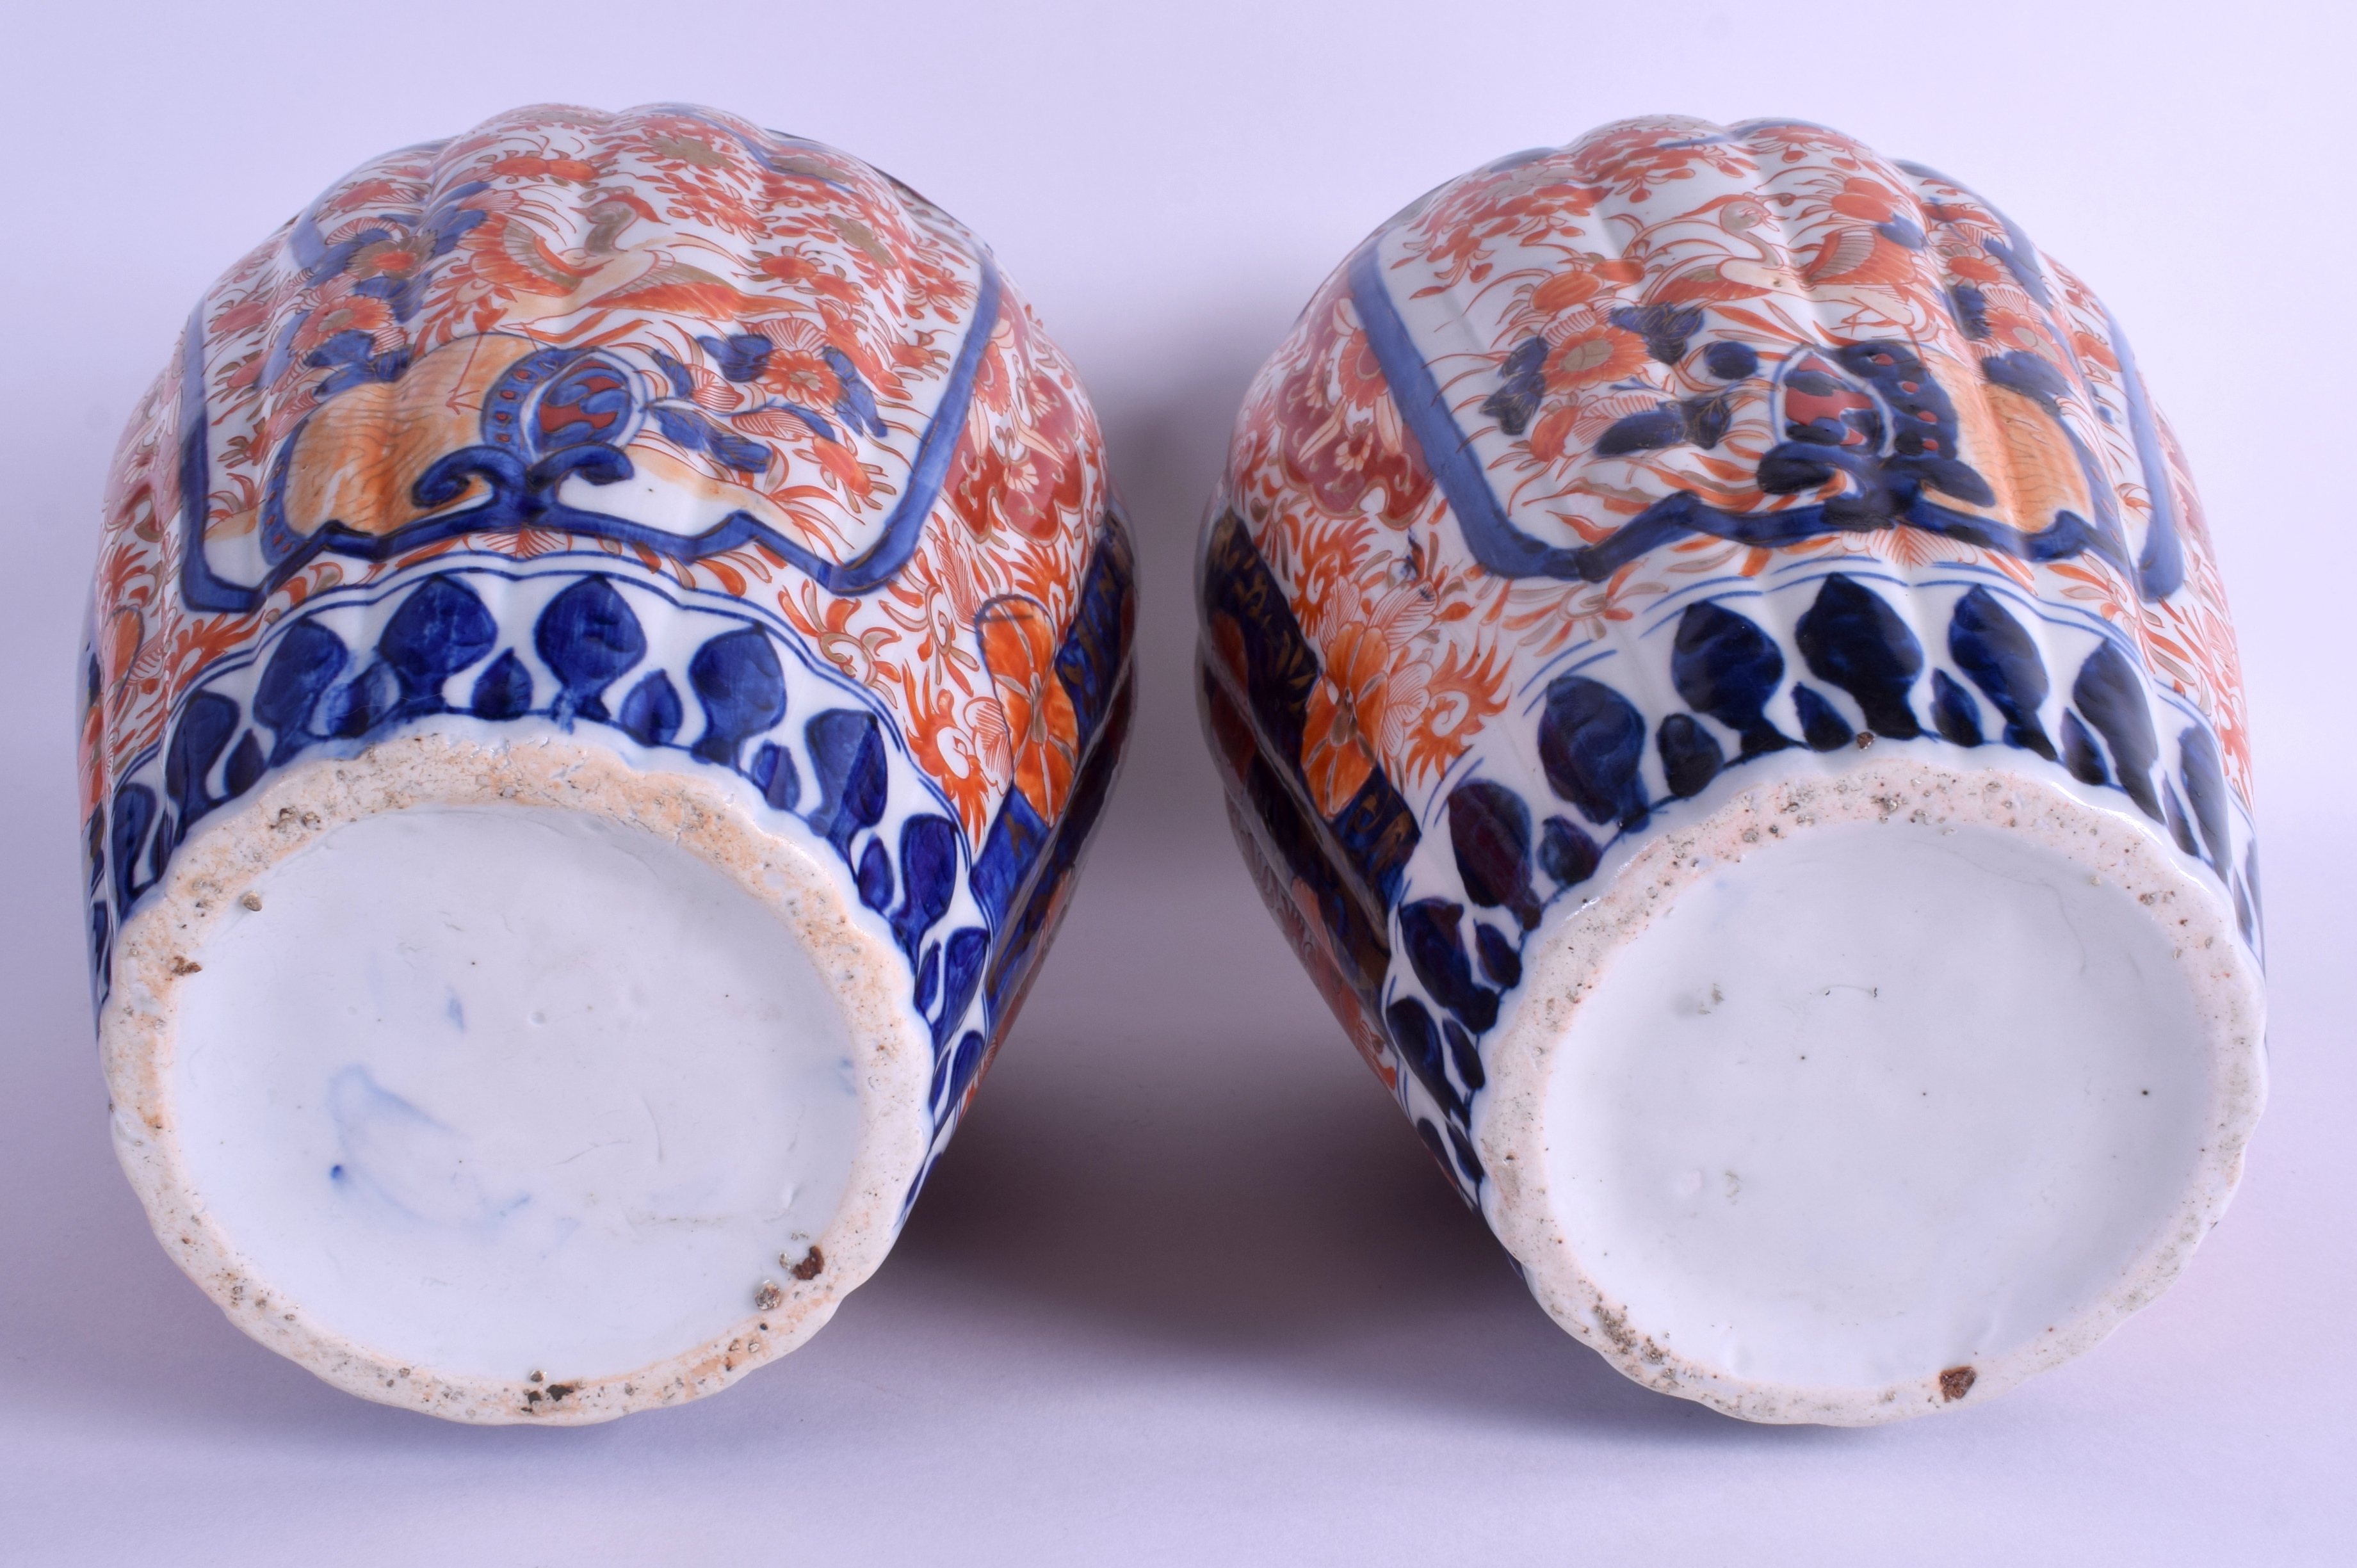 A LARGE PAIR OF 19TH CENTURY JAPANESE MEIJI PERIOD IMARI VASES painted with flowers. 32 cm high. - Image 4 of 4